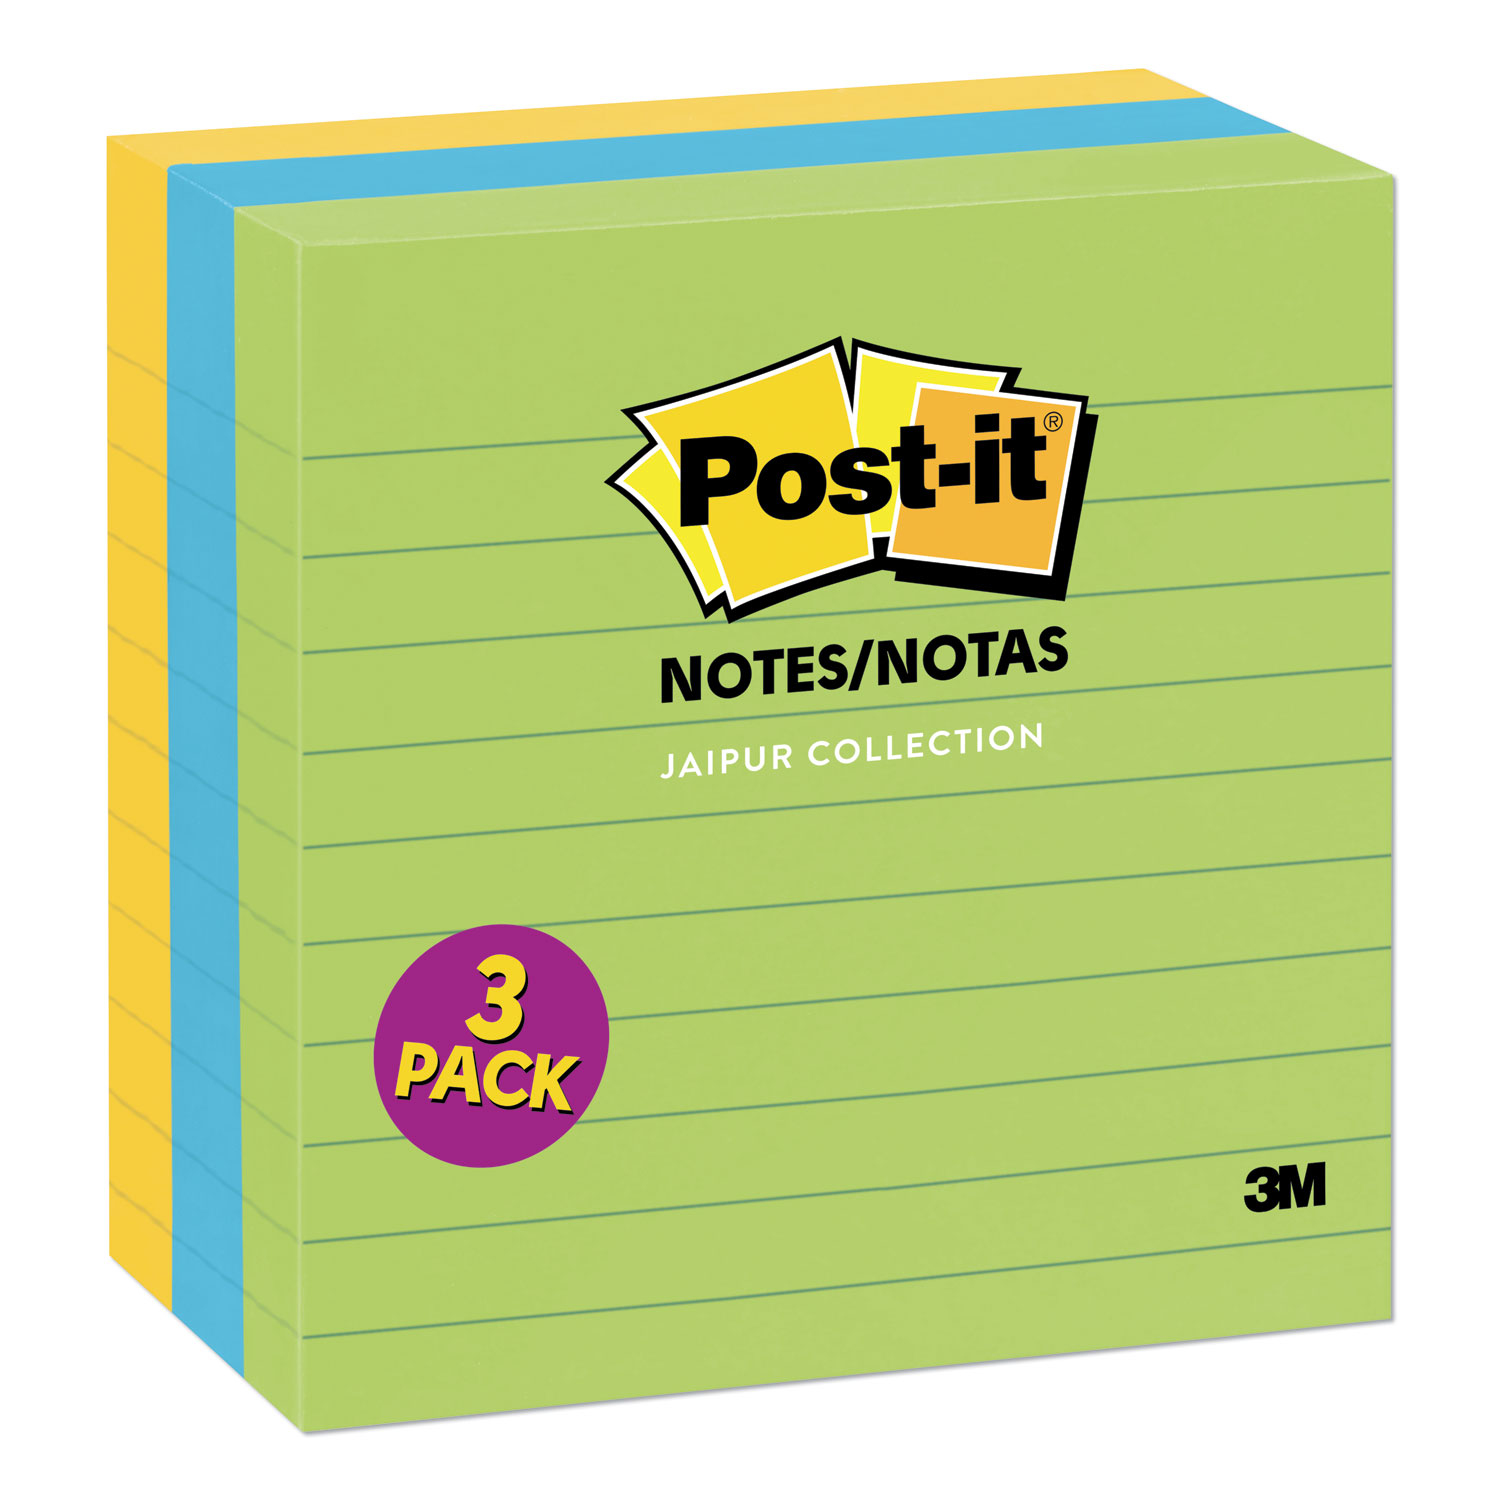  Post-it Notes 6753AUL Original Pads in Jaipur Colors, 4 x 4, Lined, 200-Sheet, 3/Pack (MMM6753AUL) 